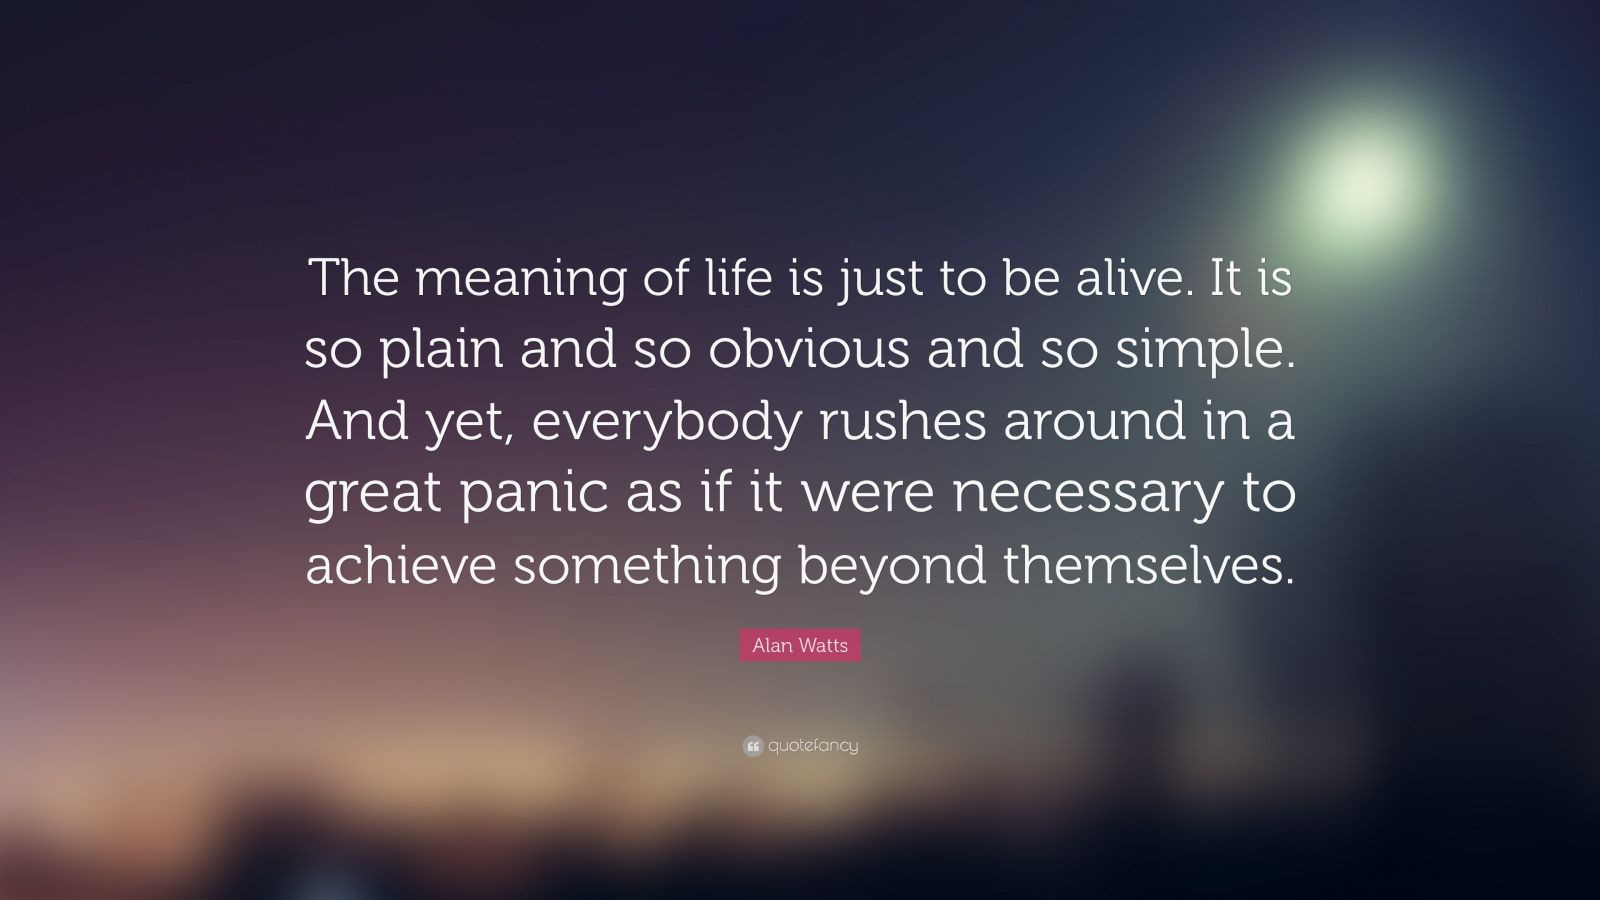 Alan Watts Quotes About Life
 Alan Watts Quotes 57 wallpapers Quotefancy